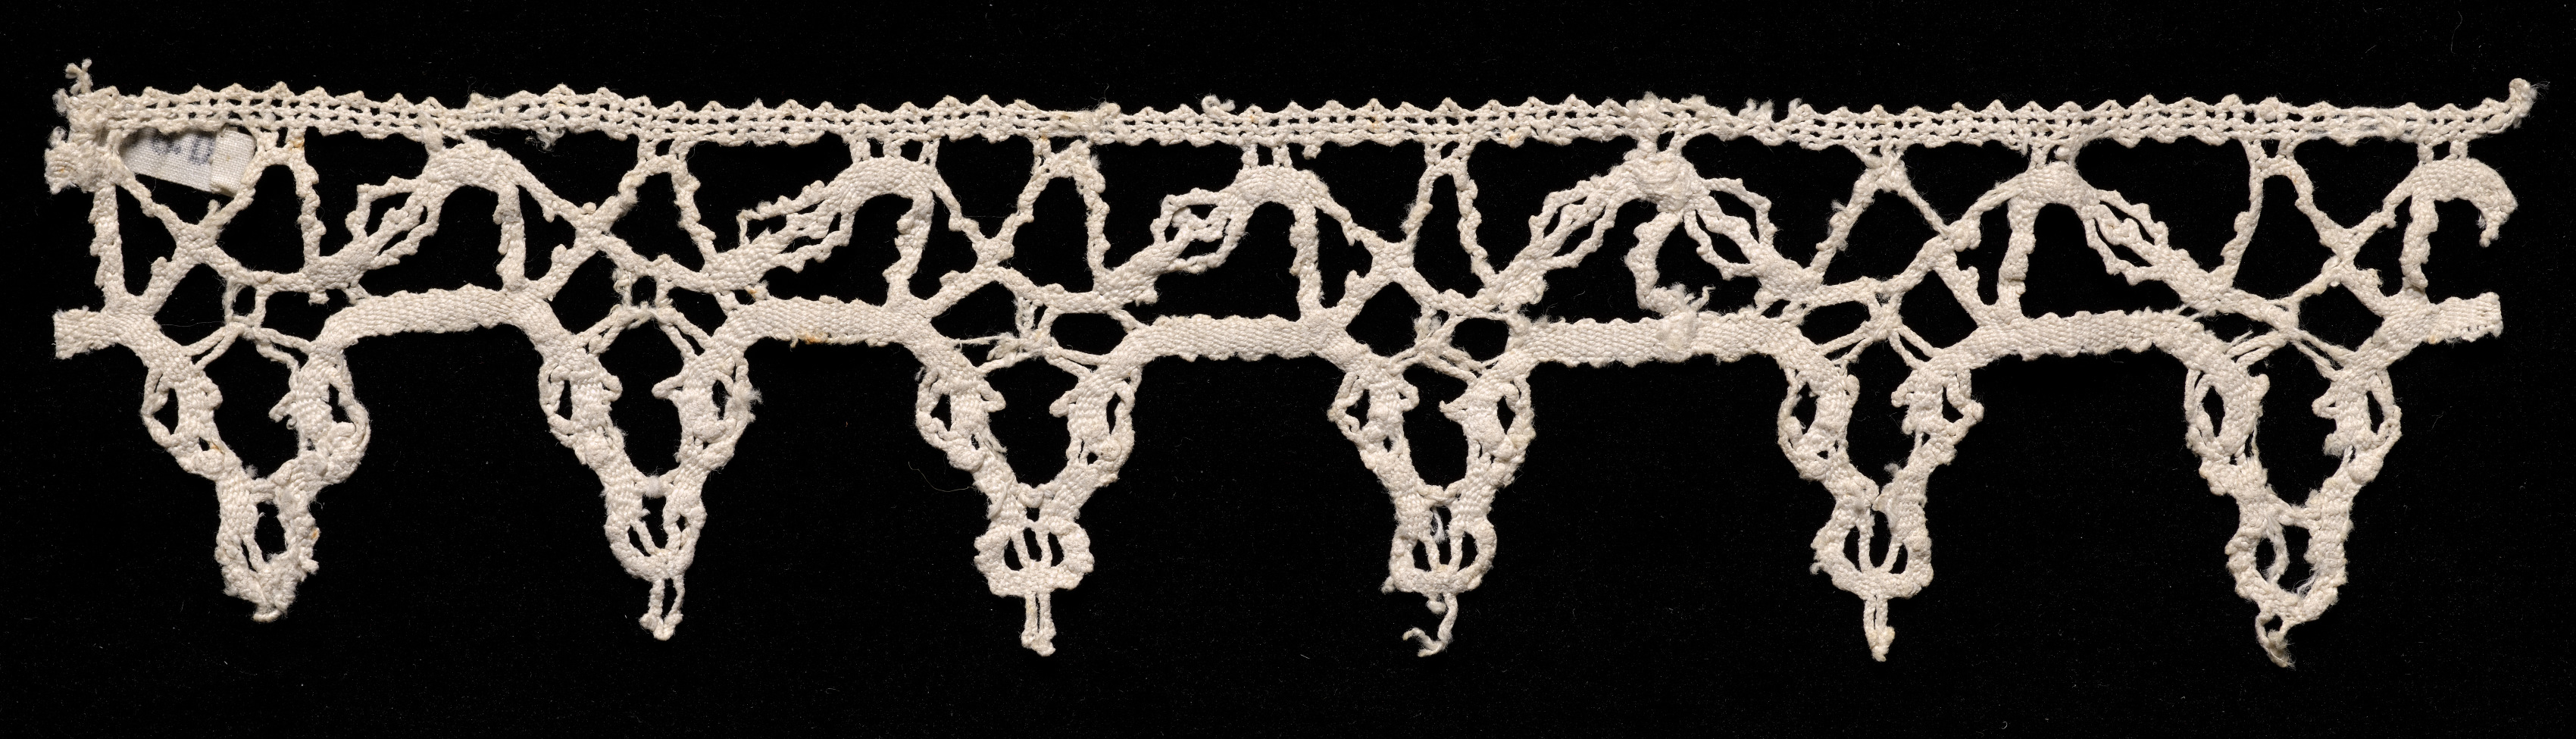 Bobbin Lace Edging with Points